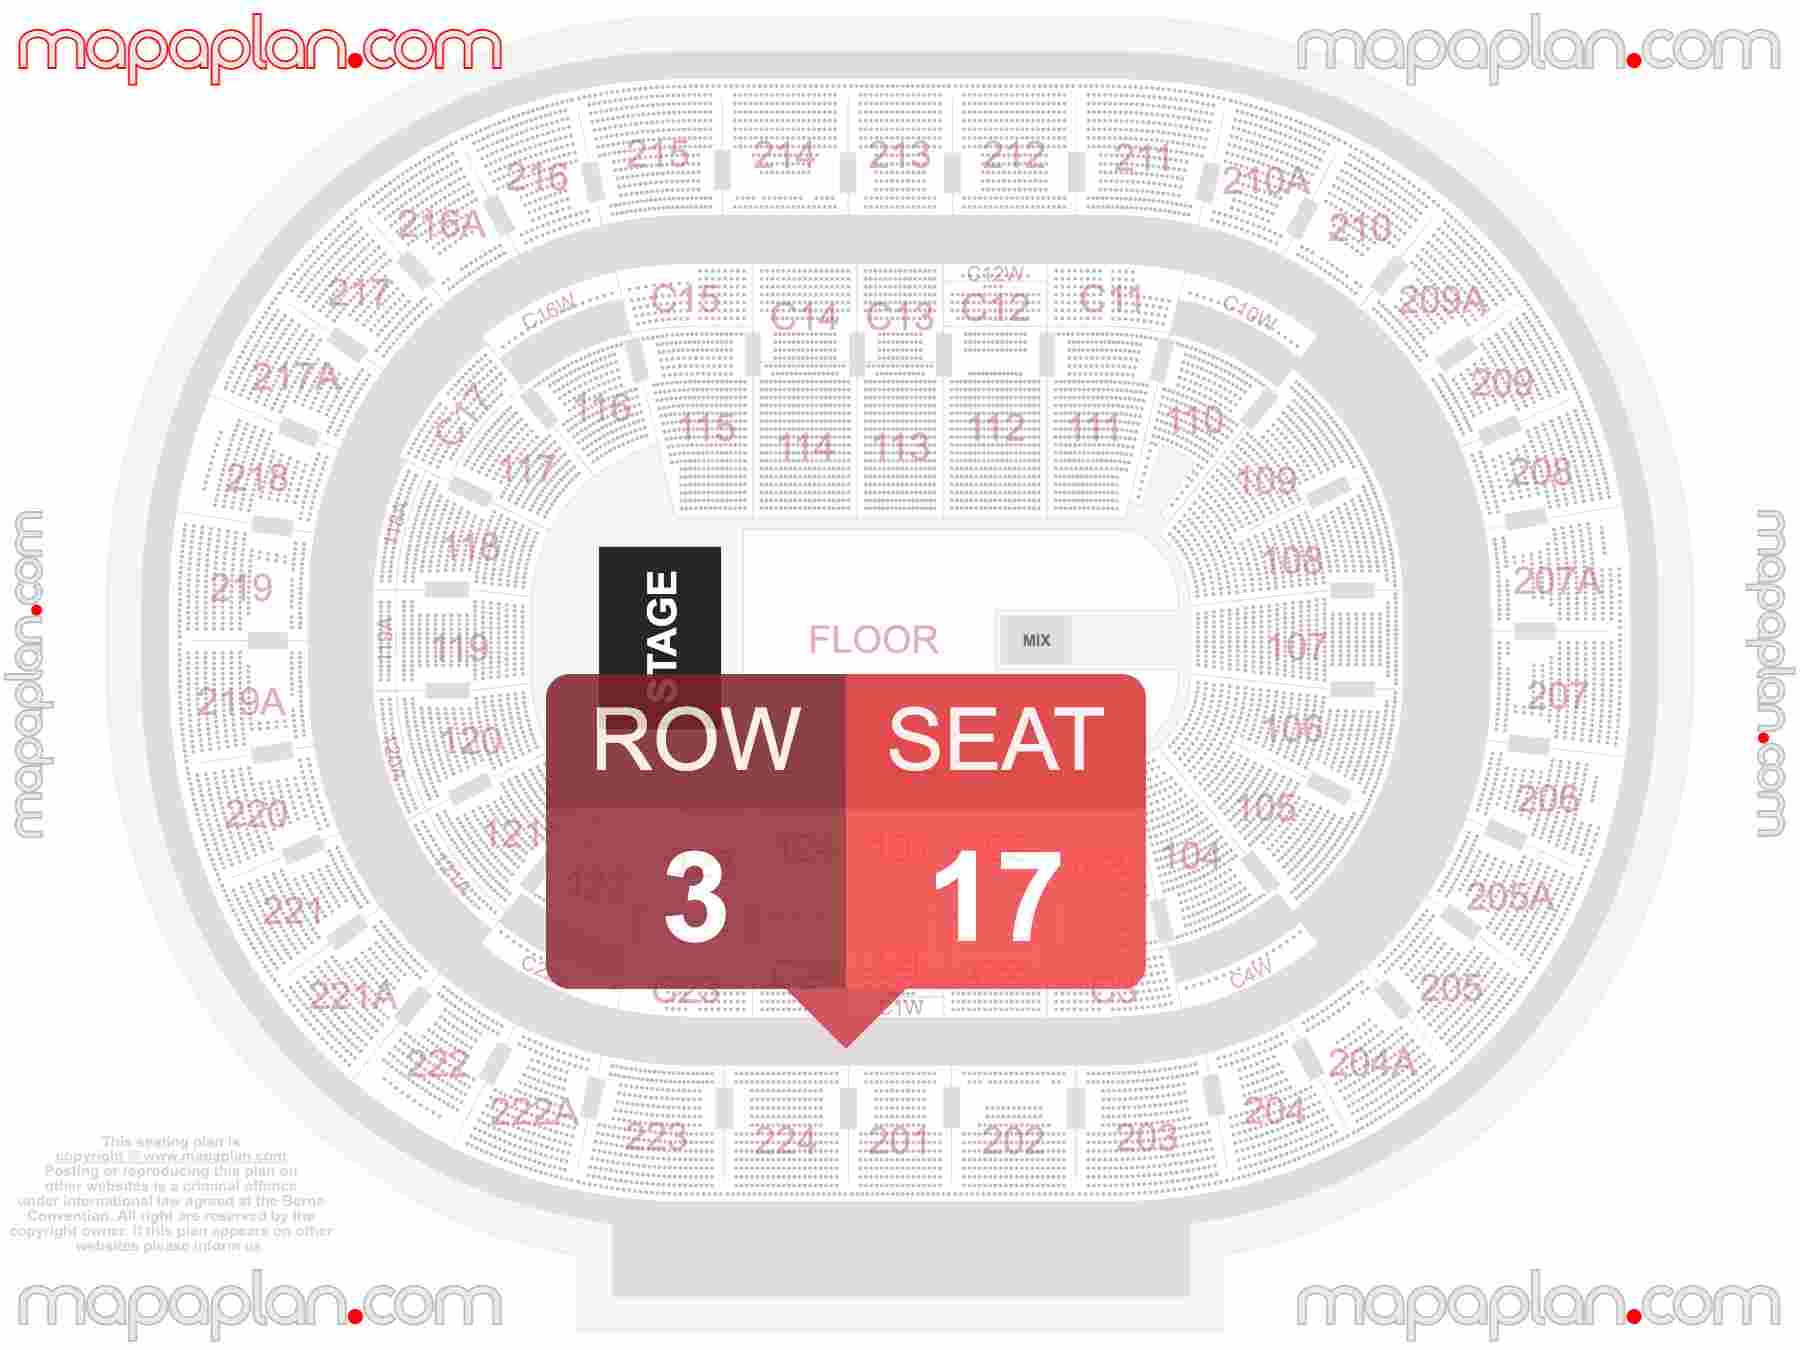 Philadelphia Wells Fargo Center seating chart Concert with floor general admission standing seating plan - Interactive map to find best seat and row numbers